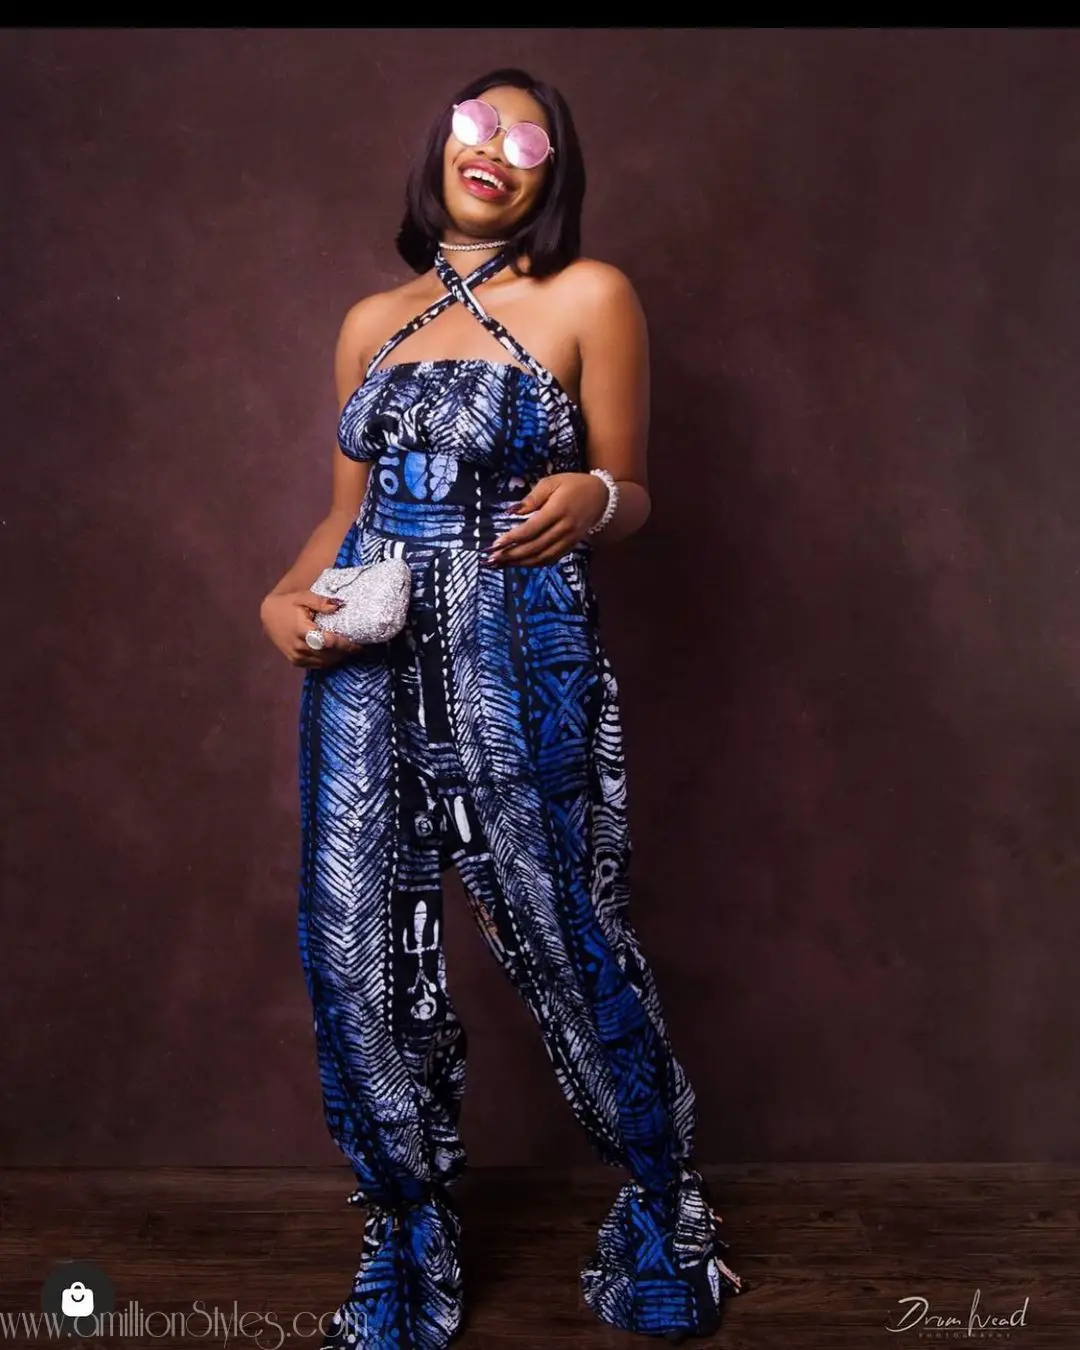 These 10 Fabulous Jumpsuits Styles Are Finger Licking Good!